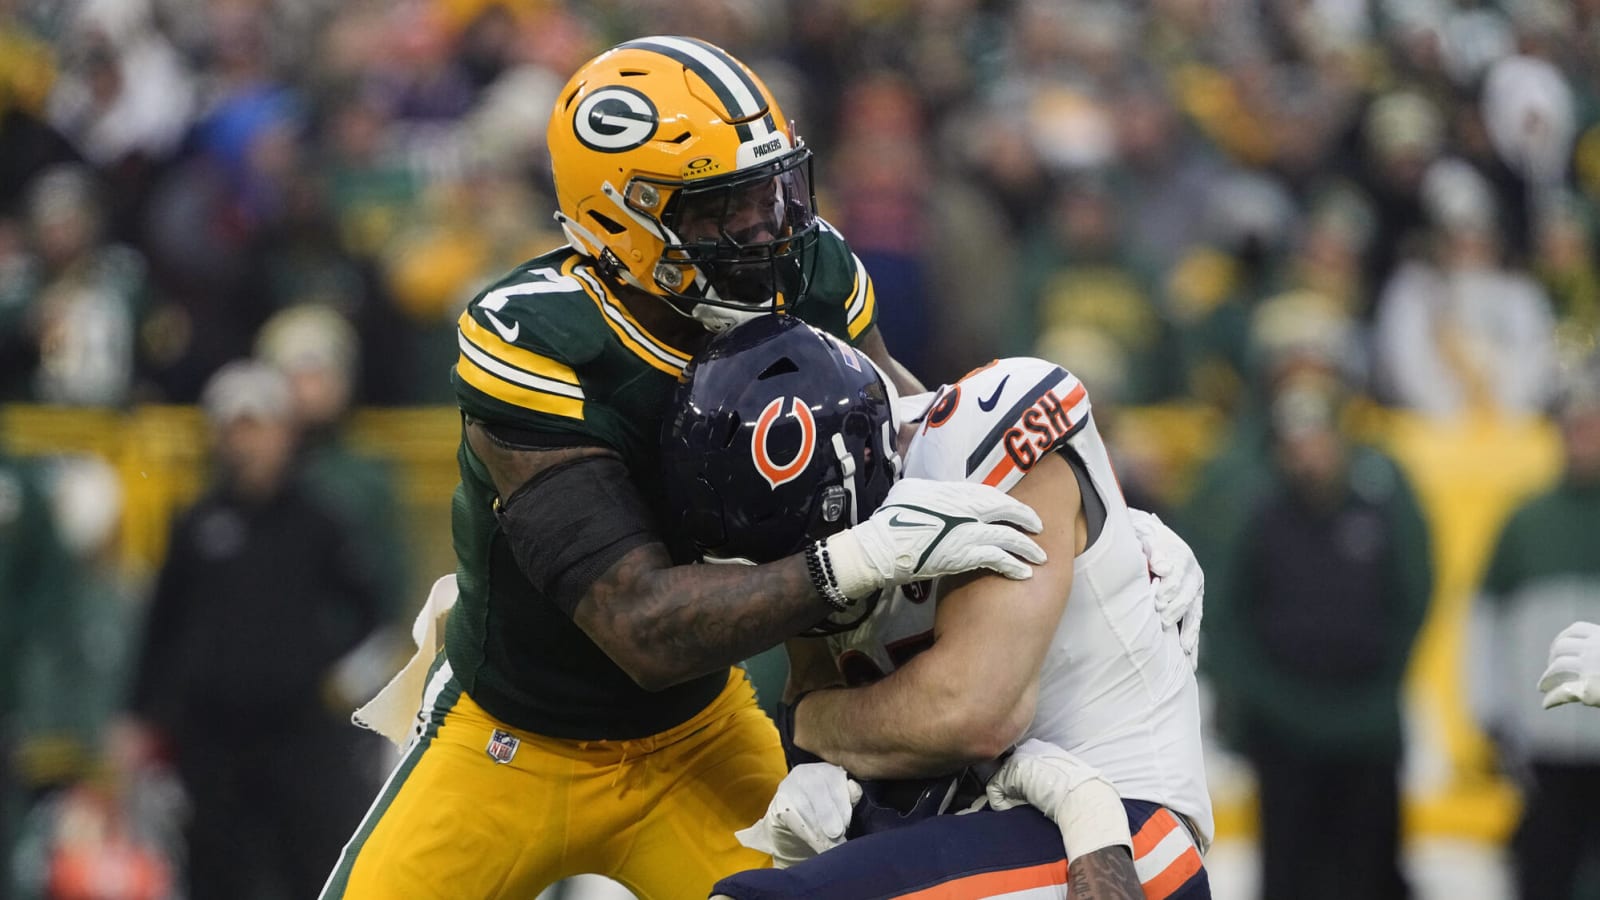 Comments from Green Bay’s Quay Walker provide a painful deja-vu moment for Bears fans